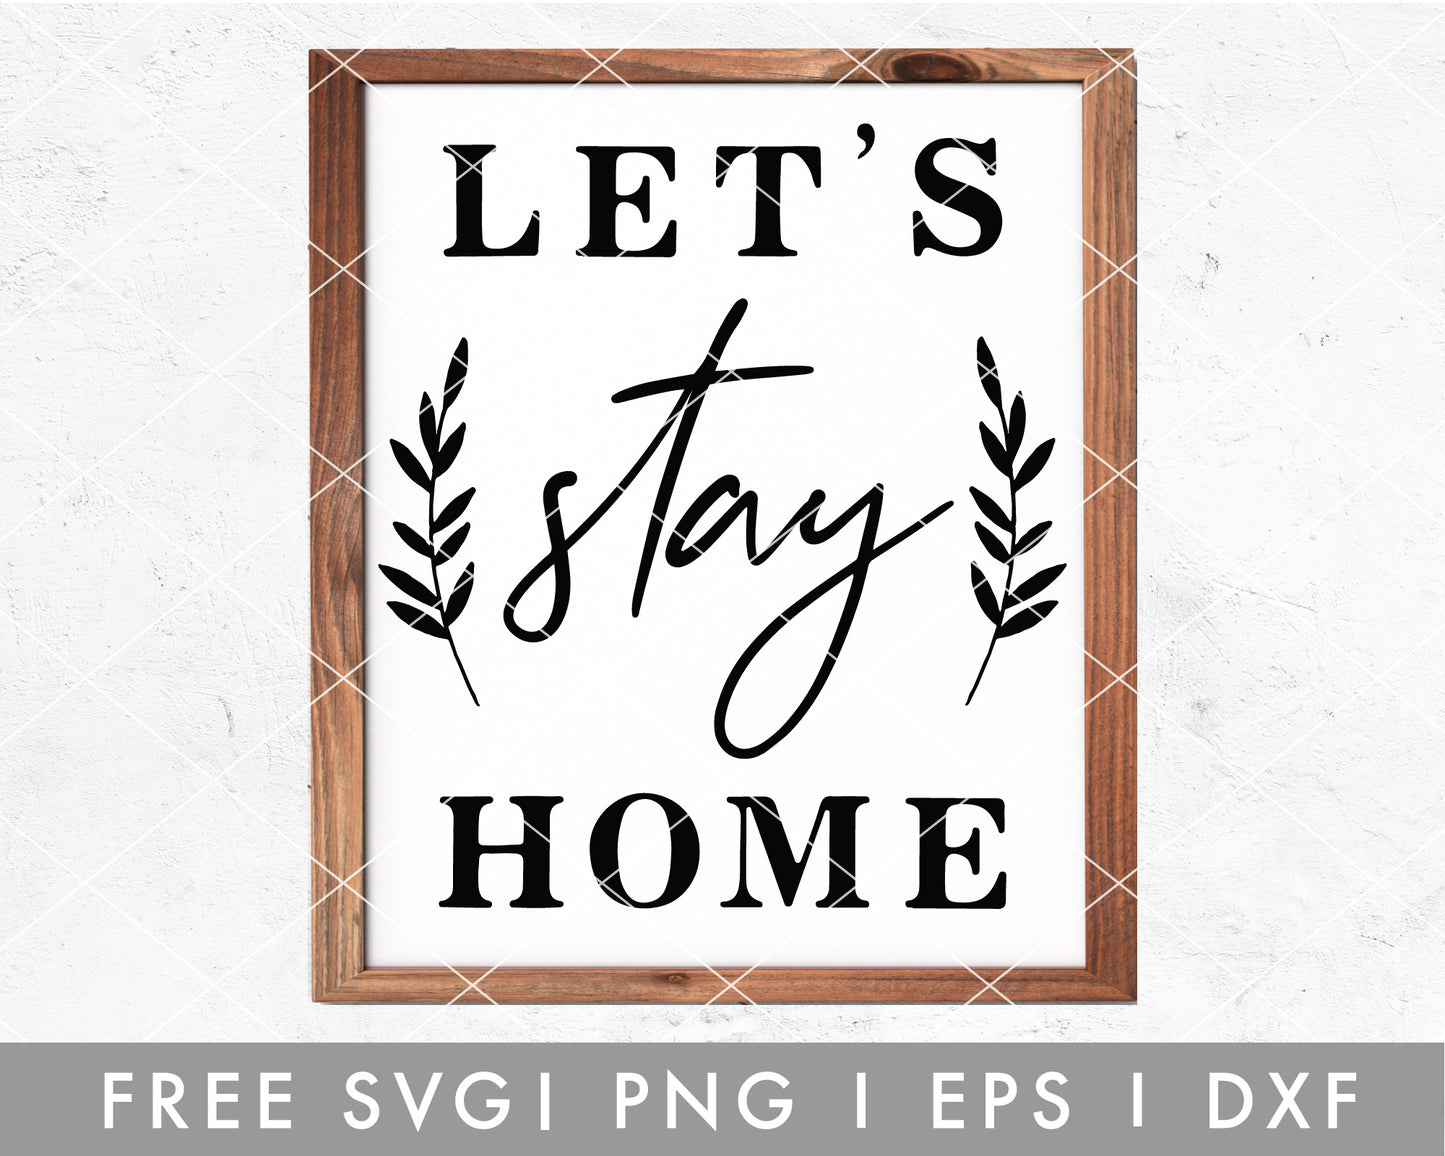 FREE Let's Stay Home SVG Cut File for Cricut, Cameo Silhouette | Free Quarantine SVG, Farmhouse Sign SVG